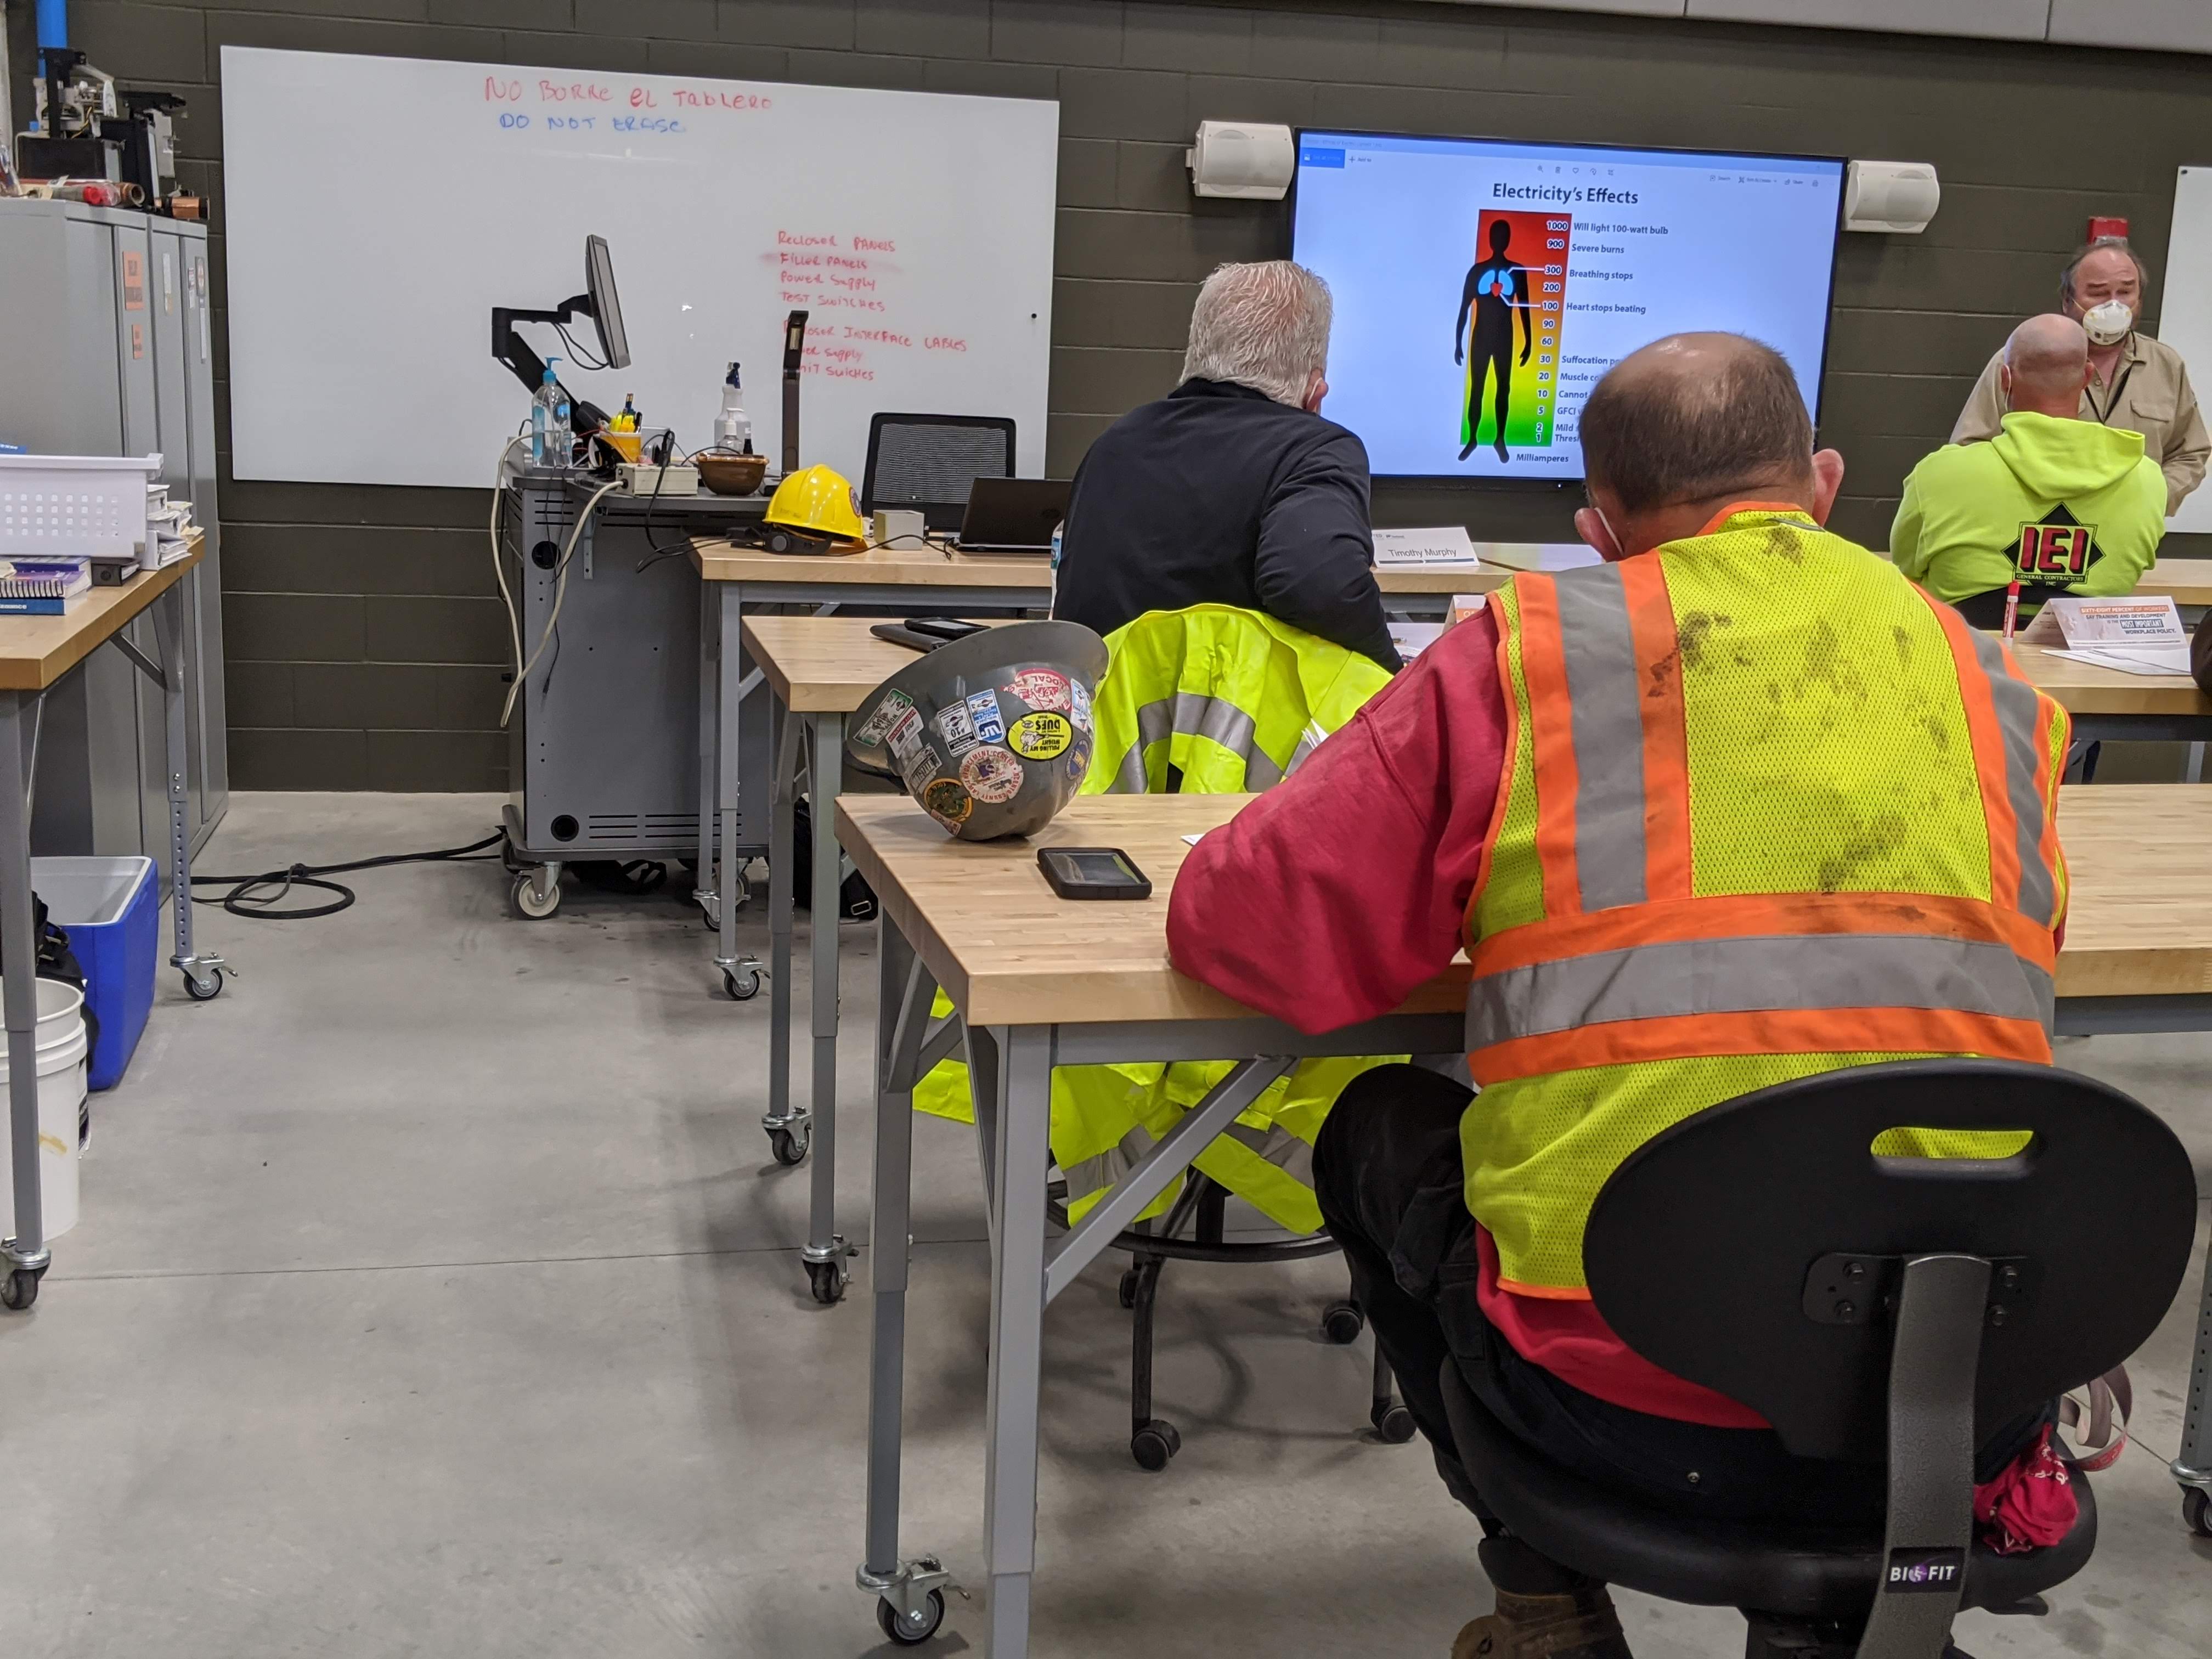 Training in Utilities room with men in safety vests.